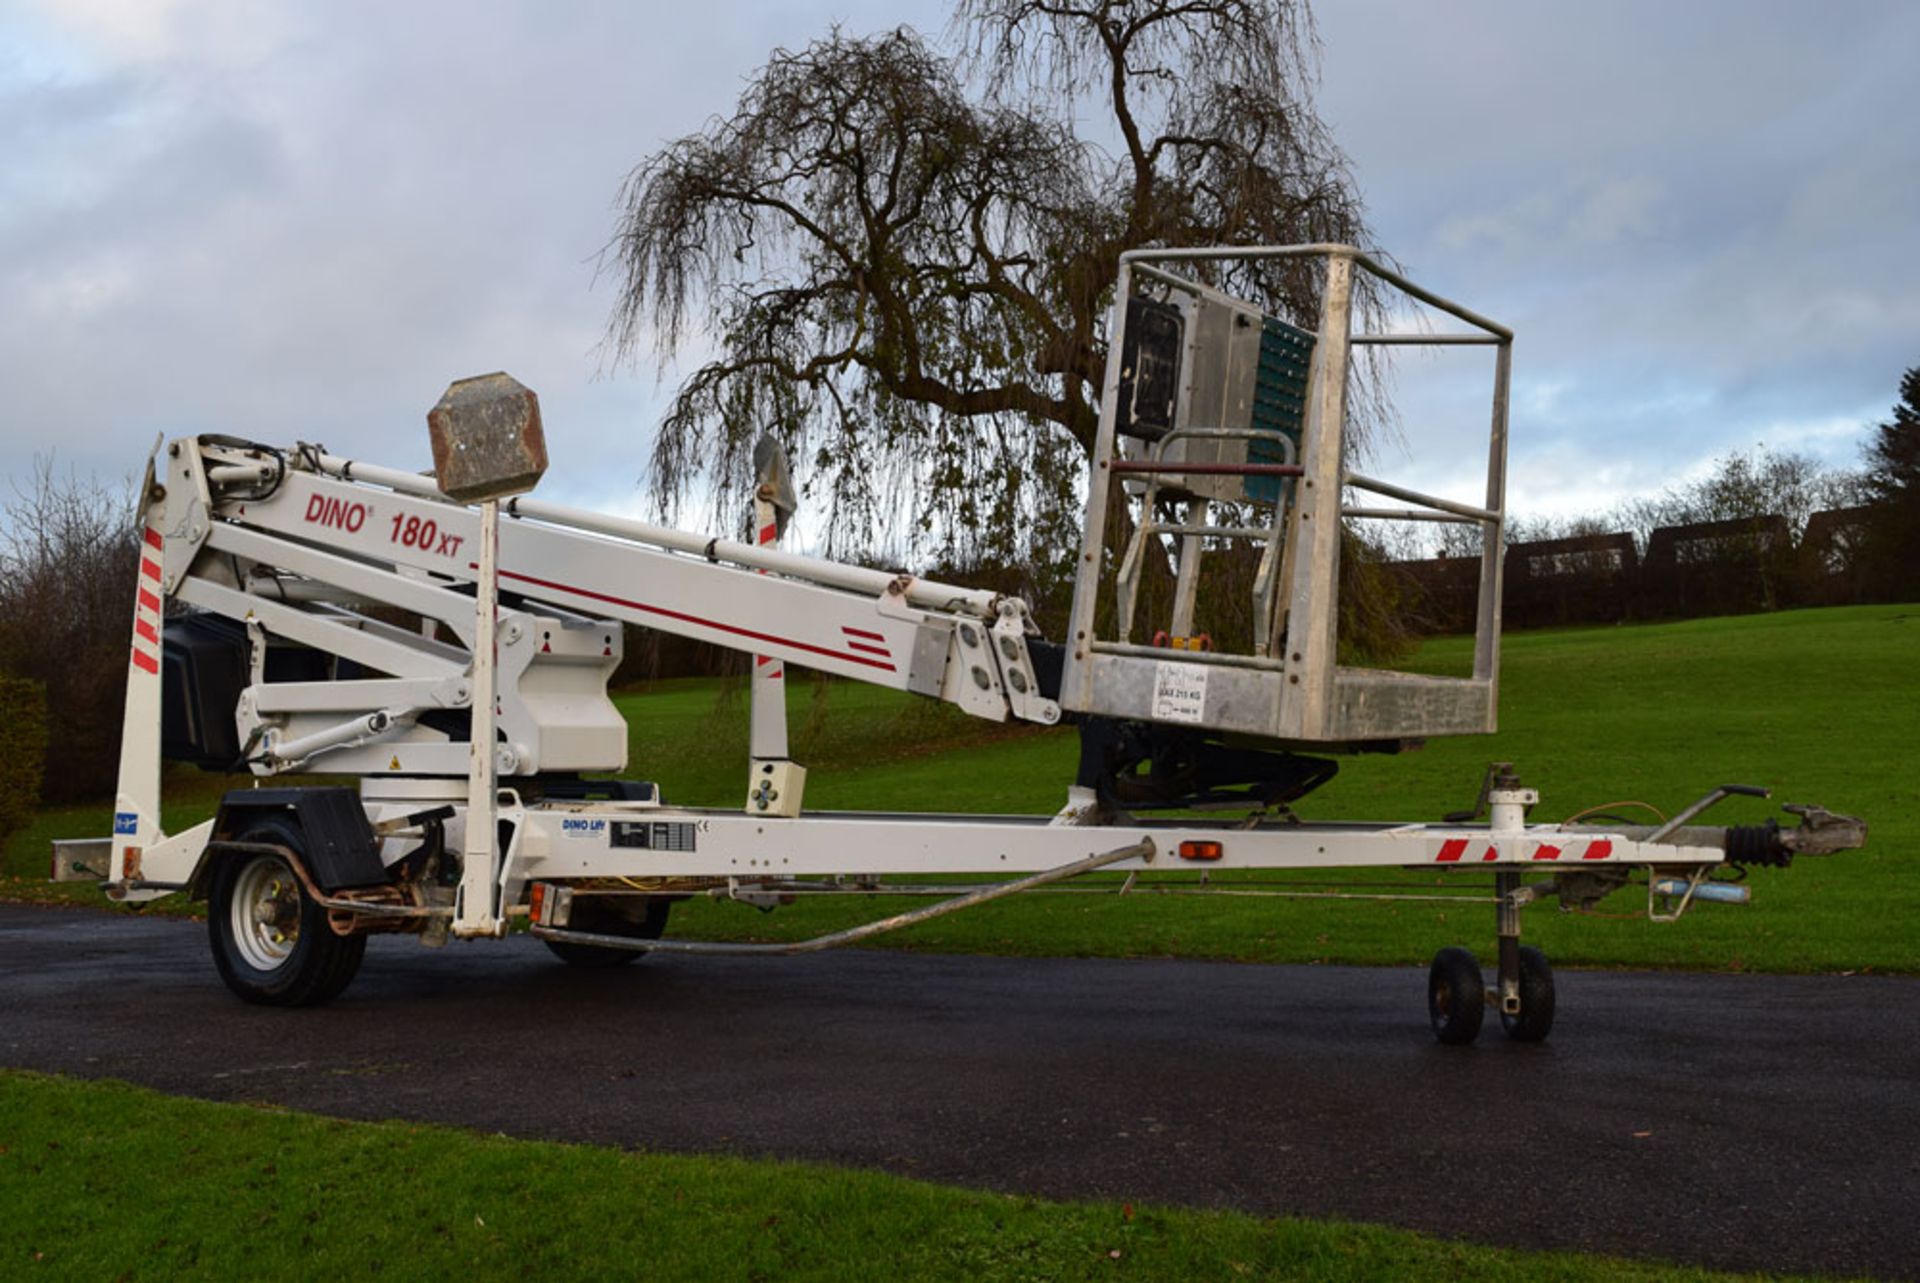 2002 Dino 180XT Trailer Mounted 18 Meter Access Lift - Image 2 of 3